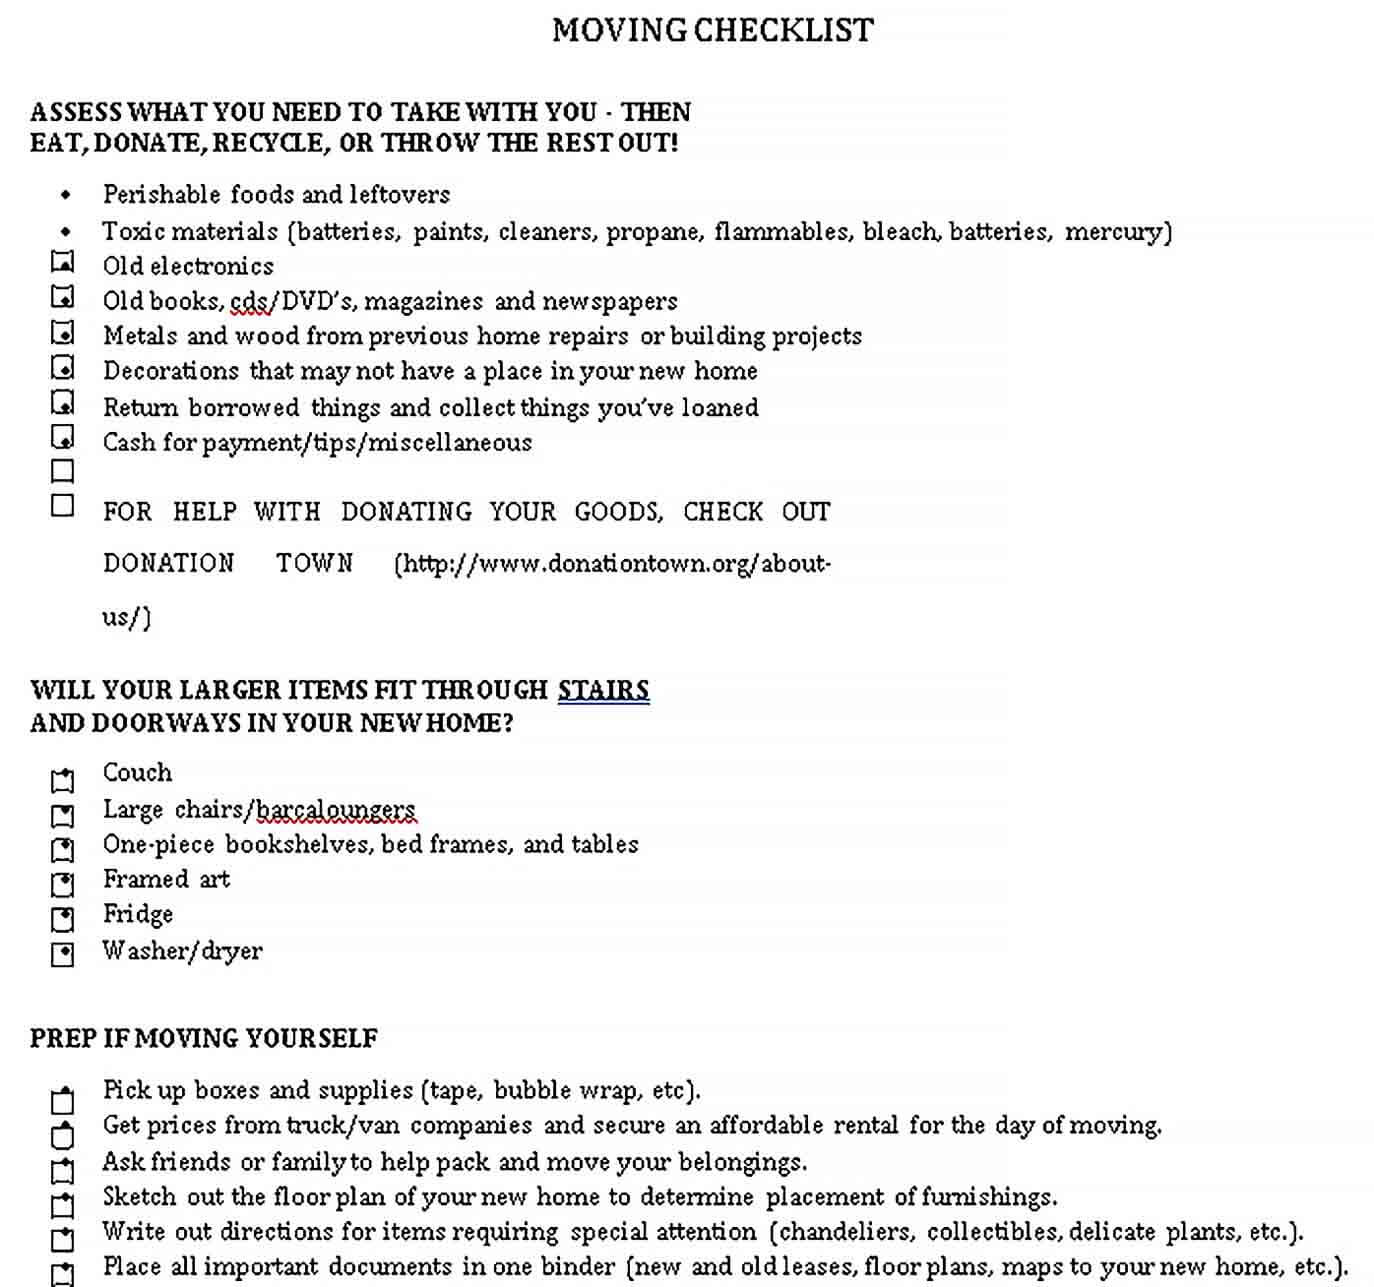 Sample PDF Format of Moving Checklist Template